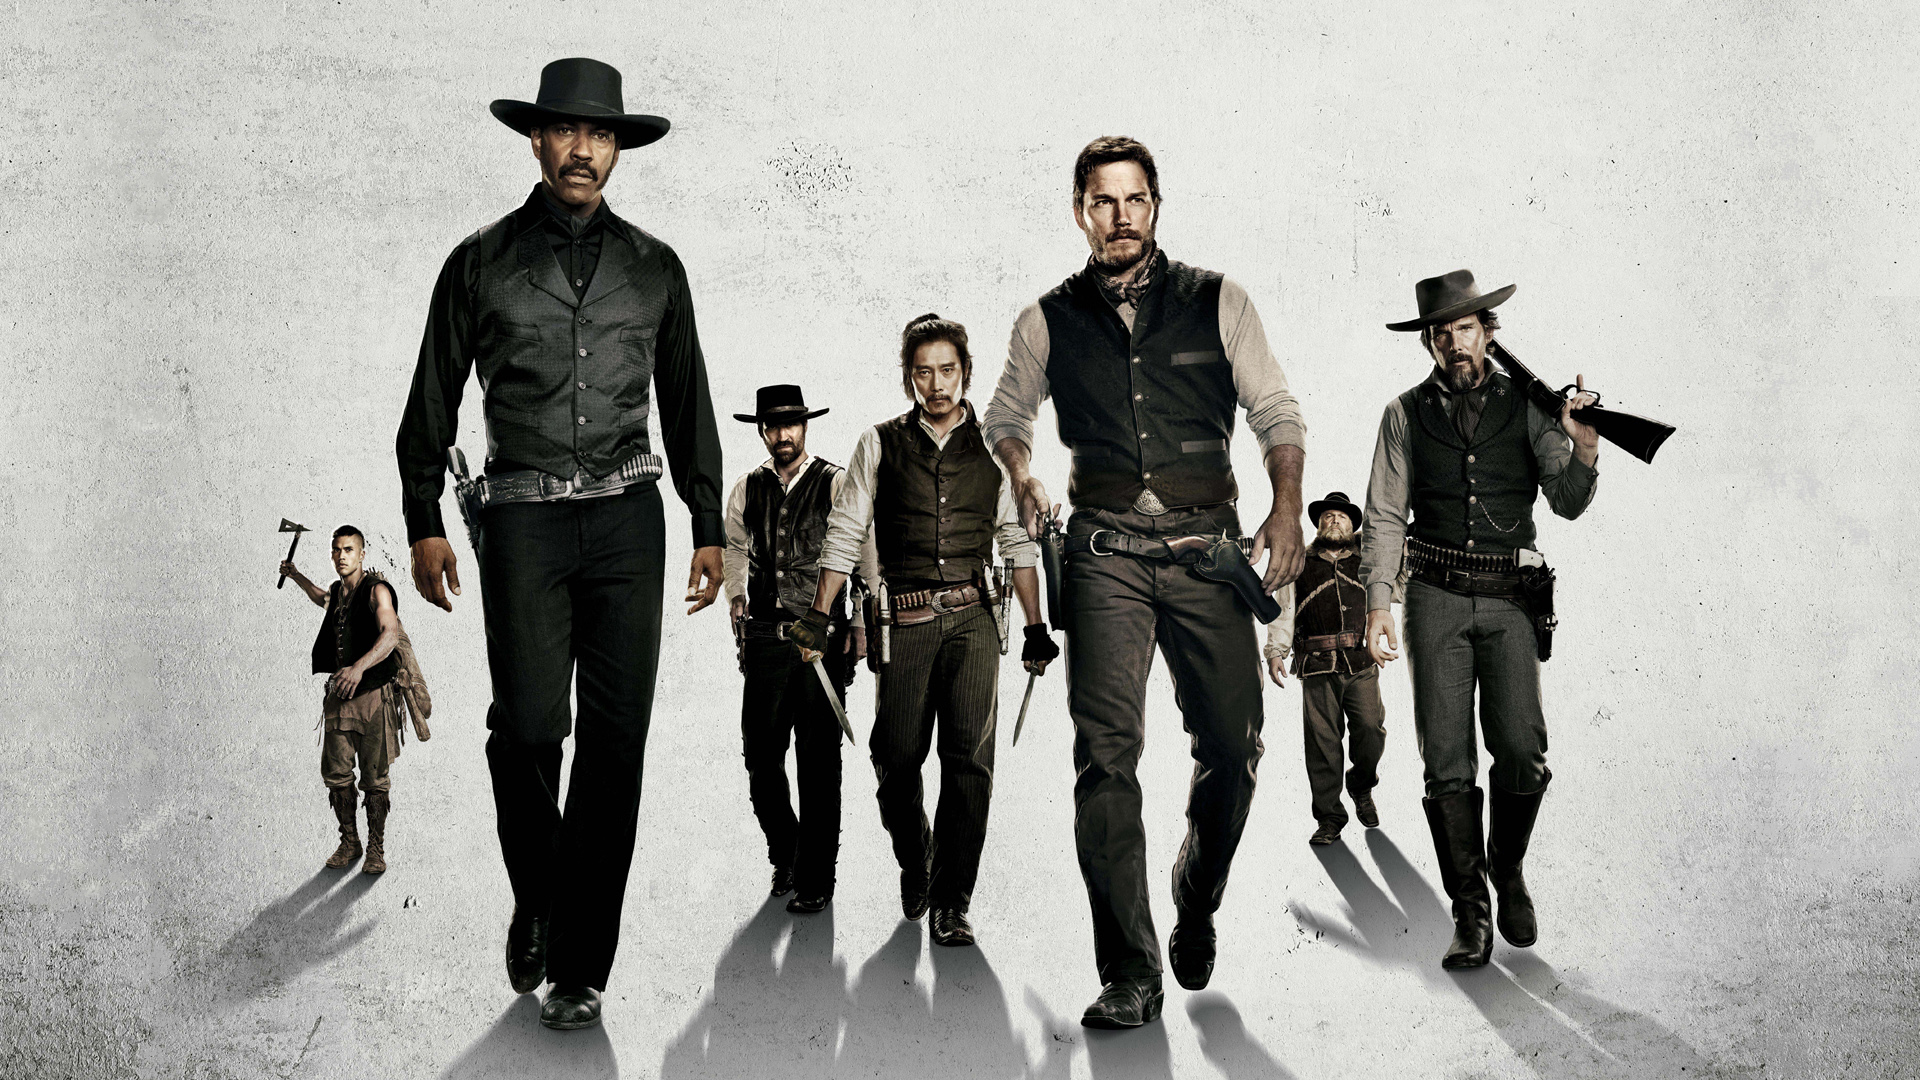 Movie The Magnificent Seven (2016) HD Wallpaper | Background Image